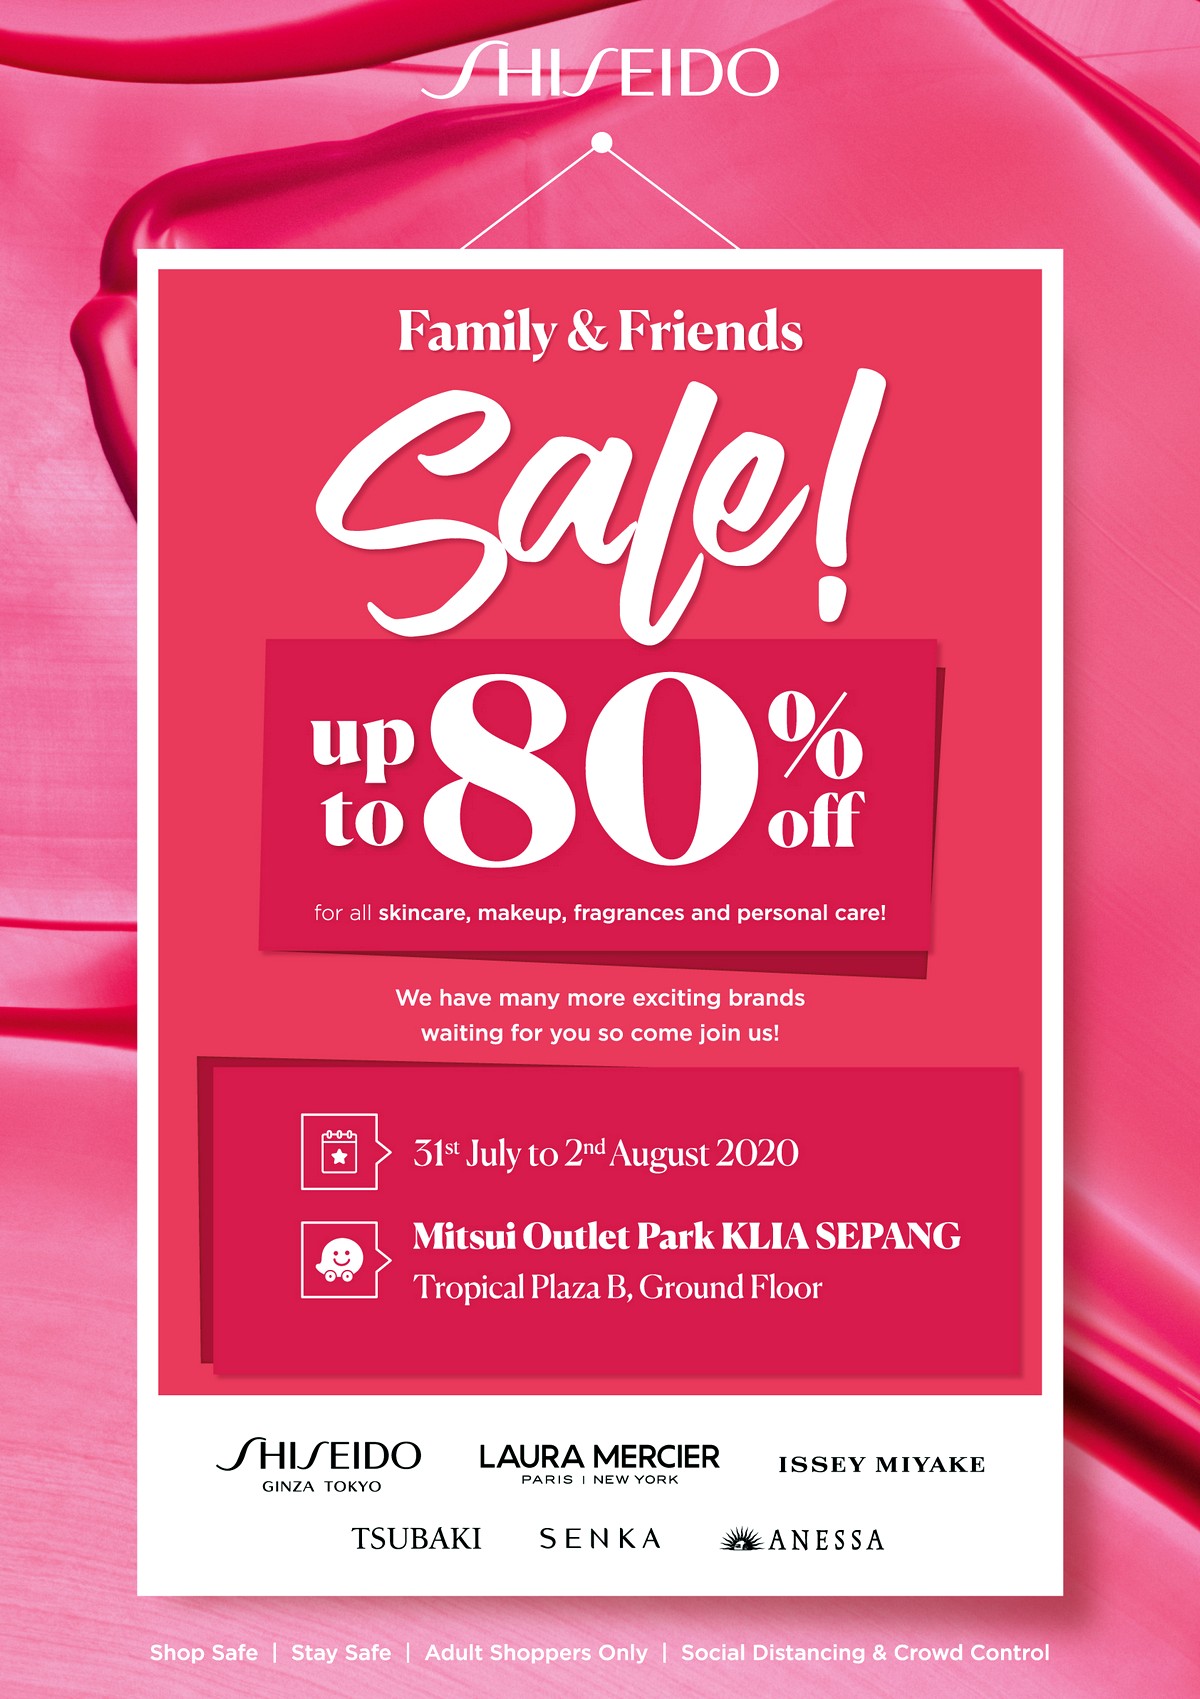 Family-and-Friends-Sale-For-ref-only_Poster-A1_R5_FINALFINAL-1 - Beauty & Health Cosmetics Fragrances Kuala Lumpur Personal Care Putrajaya Selangor Skincare Warehouse Sale & Clearance in Malaysia 